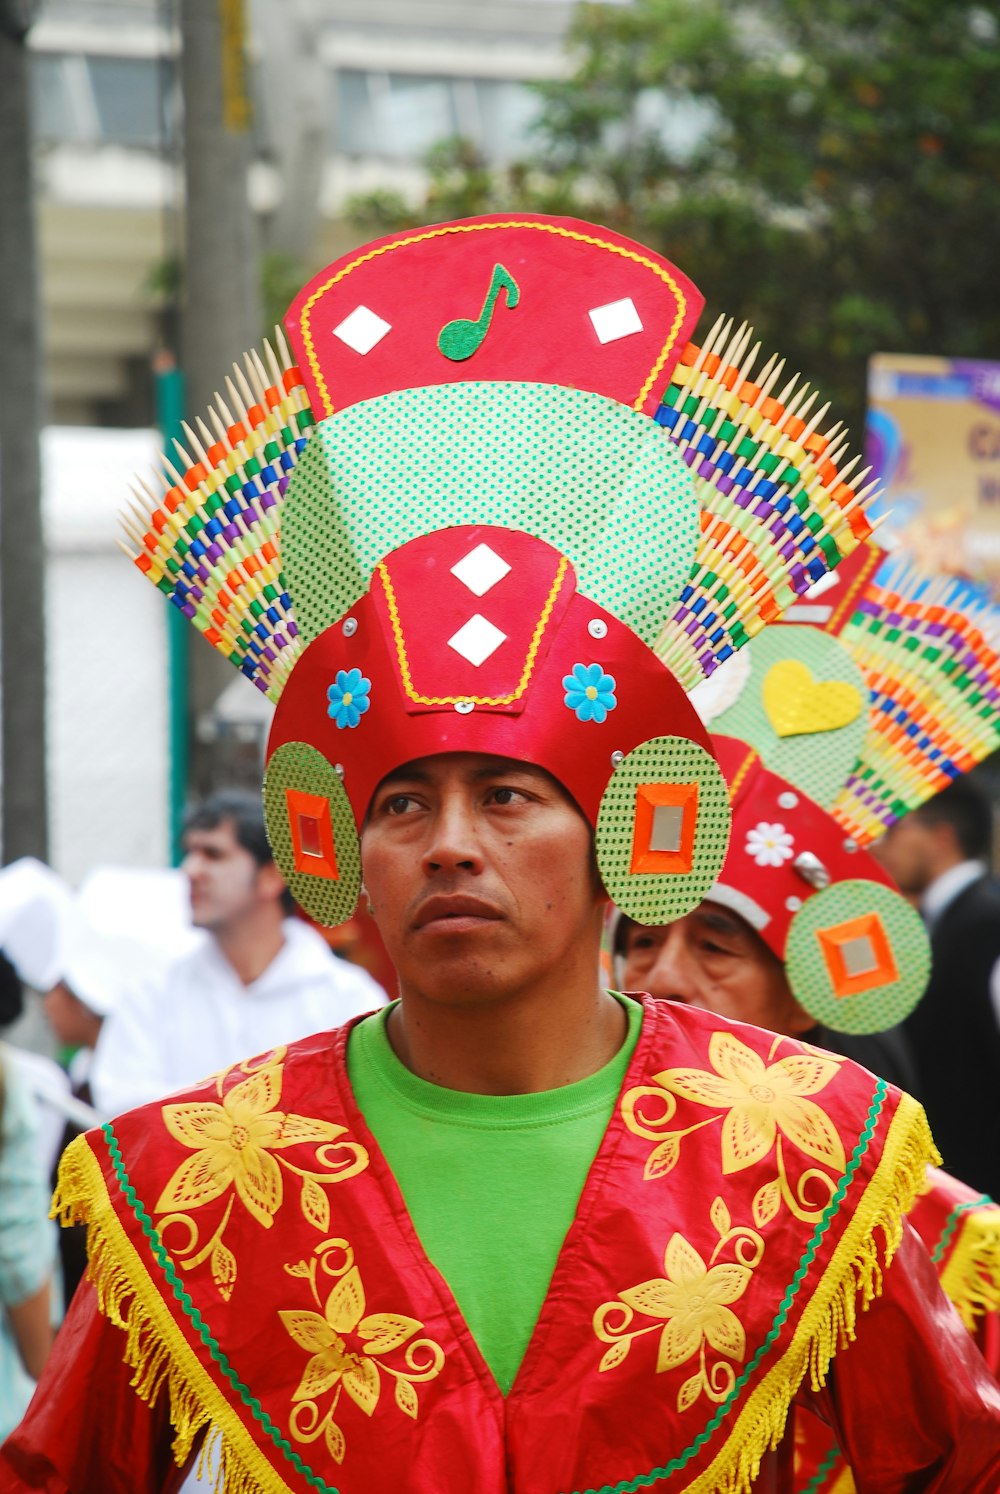 man wearing red and green heddress